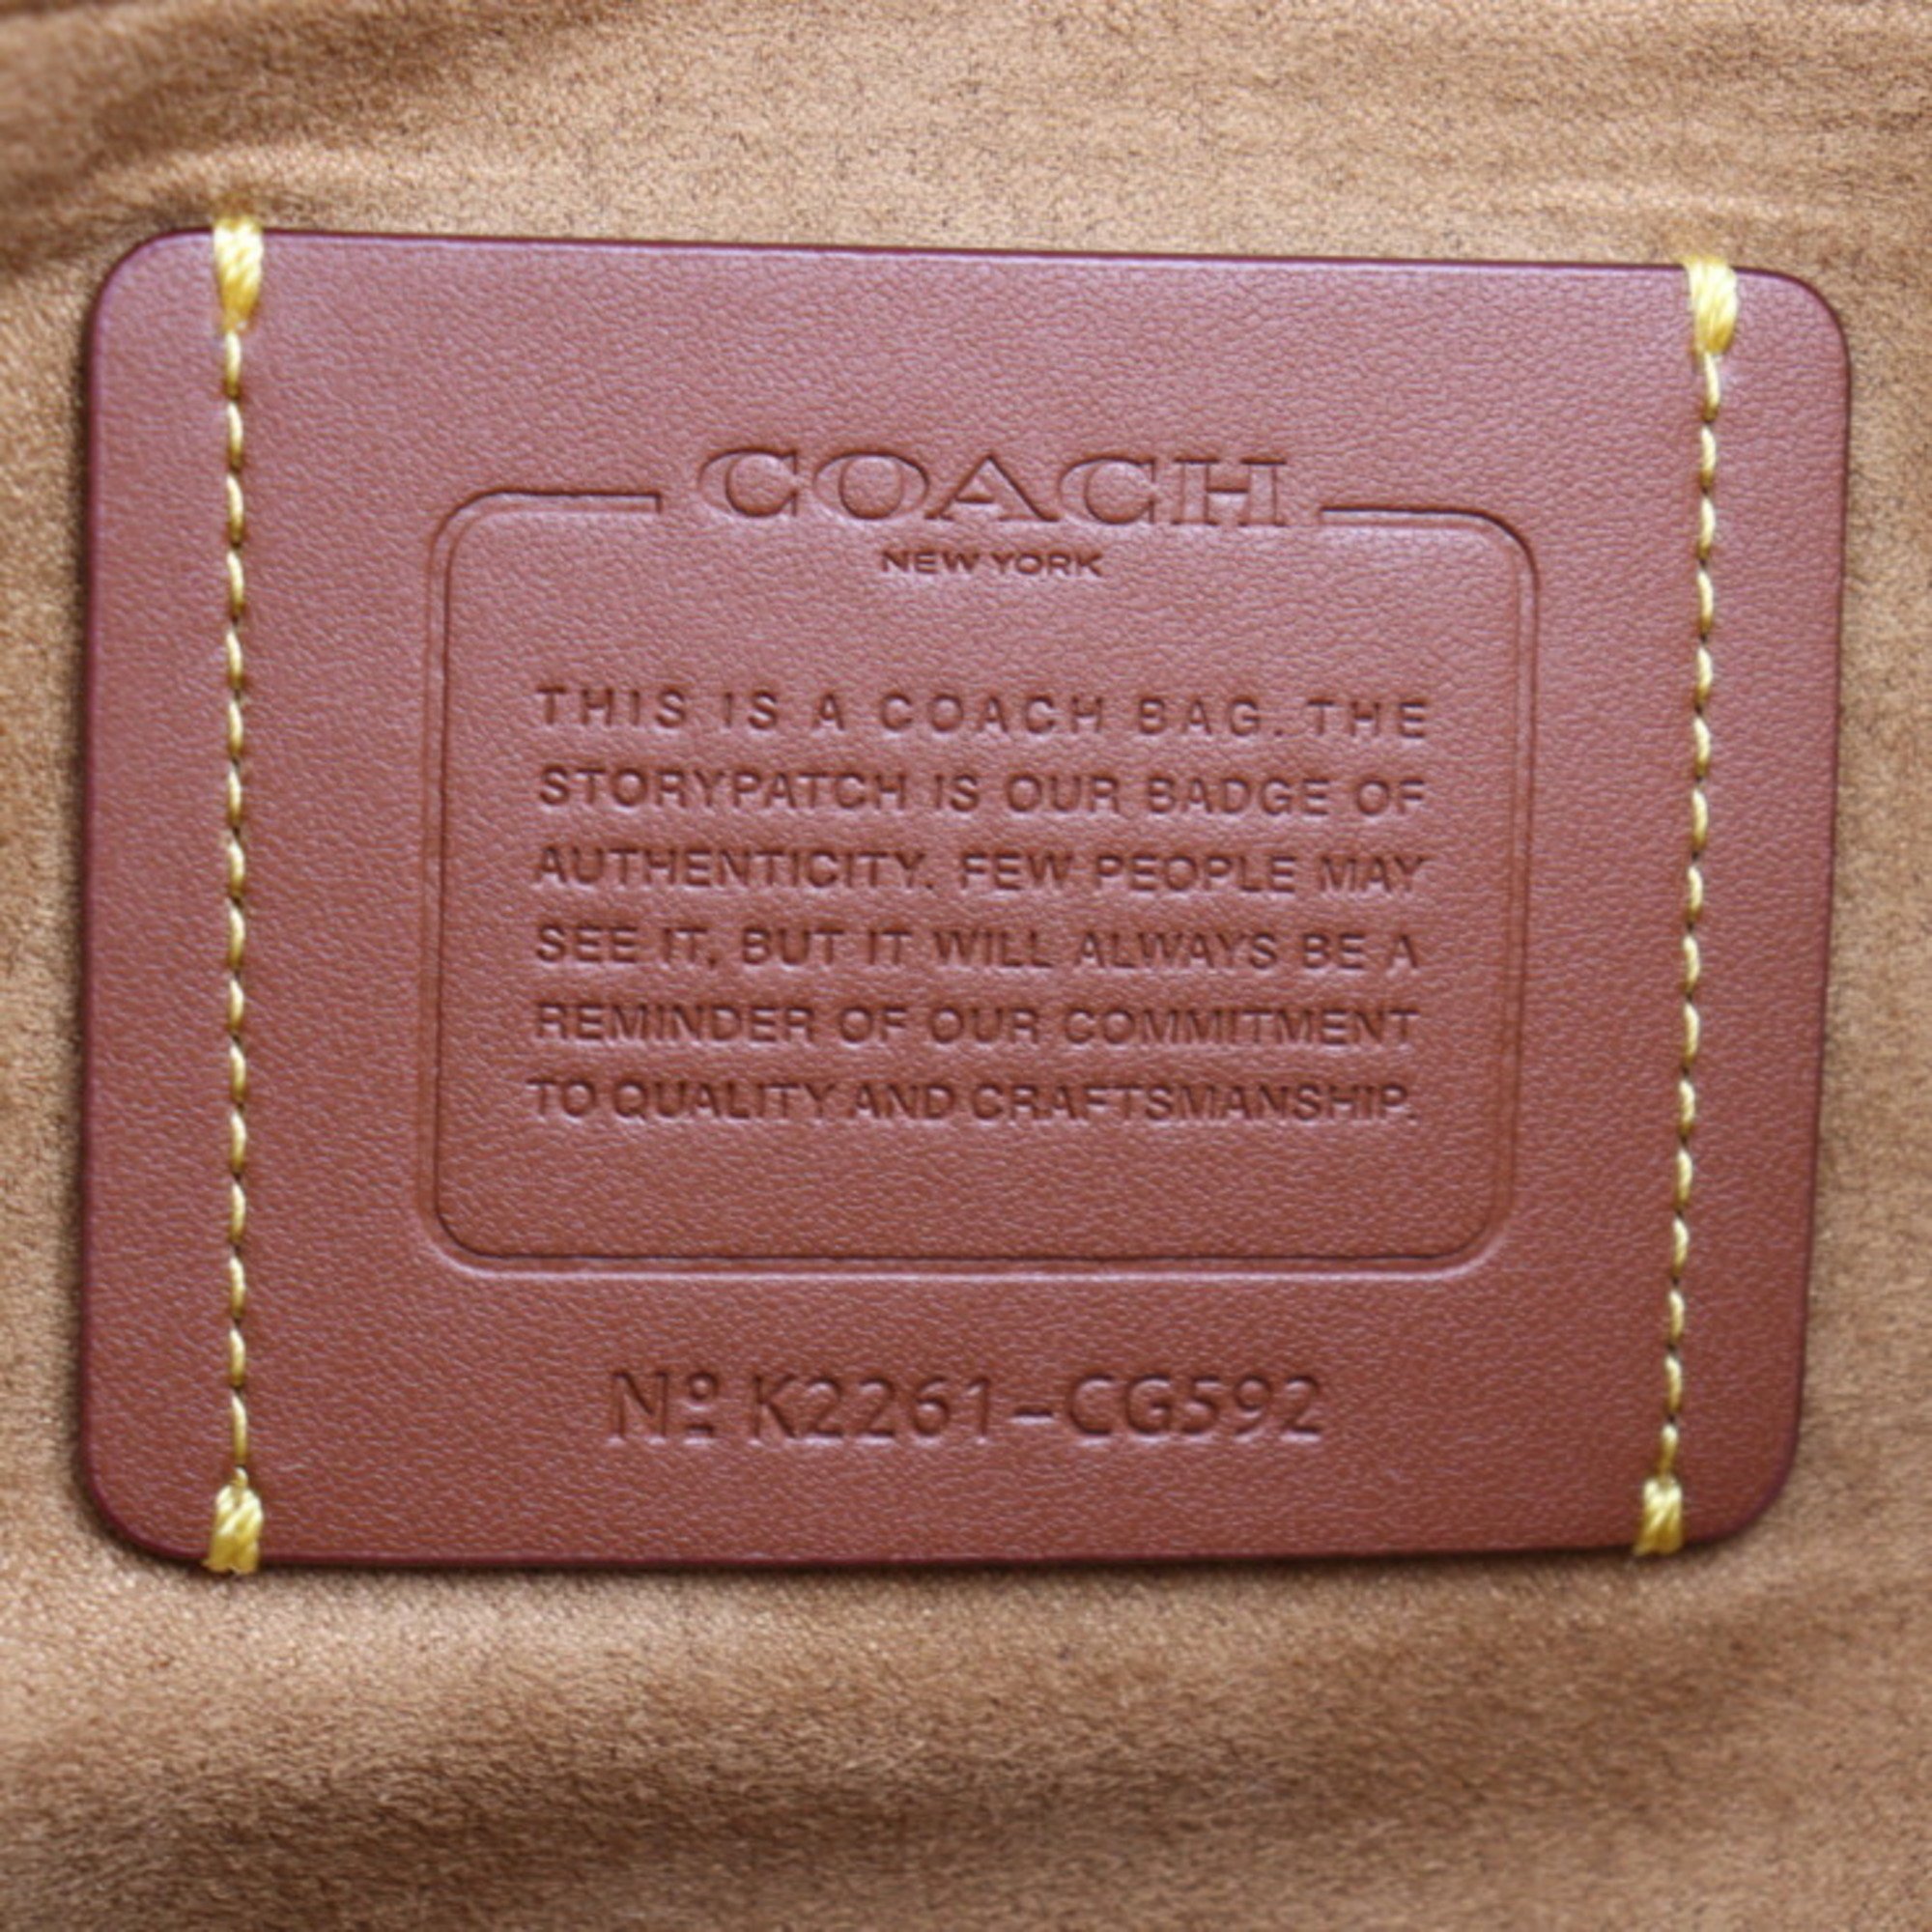 COACH Field Tote 40 Lexy Space Bag CG592 Leather Beige Shoulder